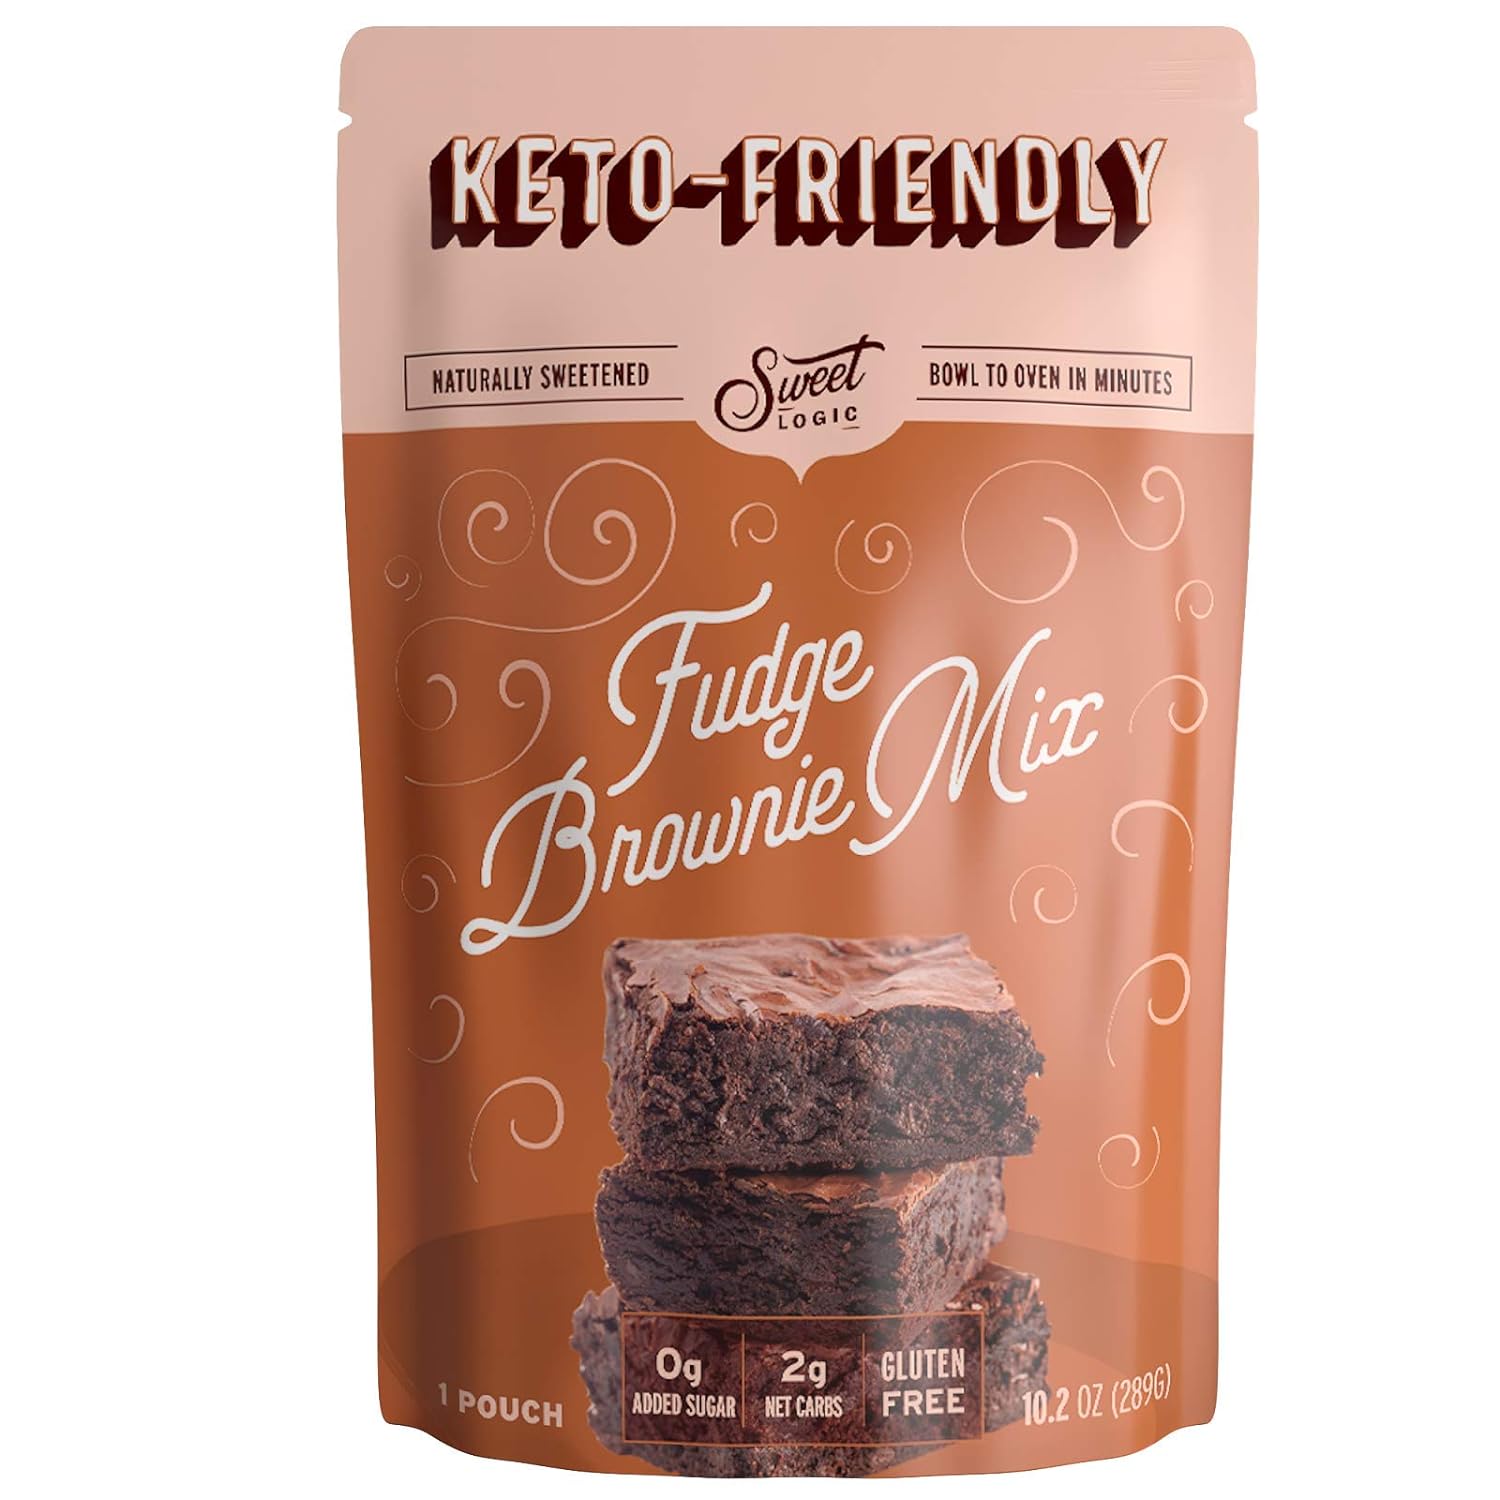 SWEET LOGIC Keto Brownie Mix | Delicious Keto Brownies Just 2G Net Carbs Per Serving | Gluten Free, Naturally Sweetened Low Carb, Diabetic Friendly Brownie Mix | 12 Servings